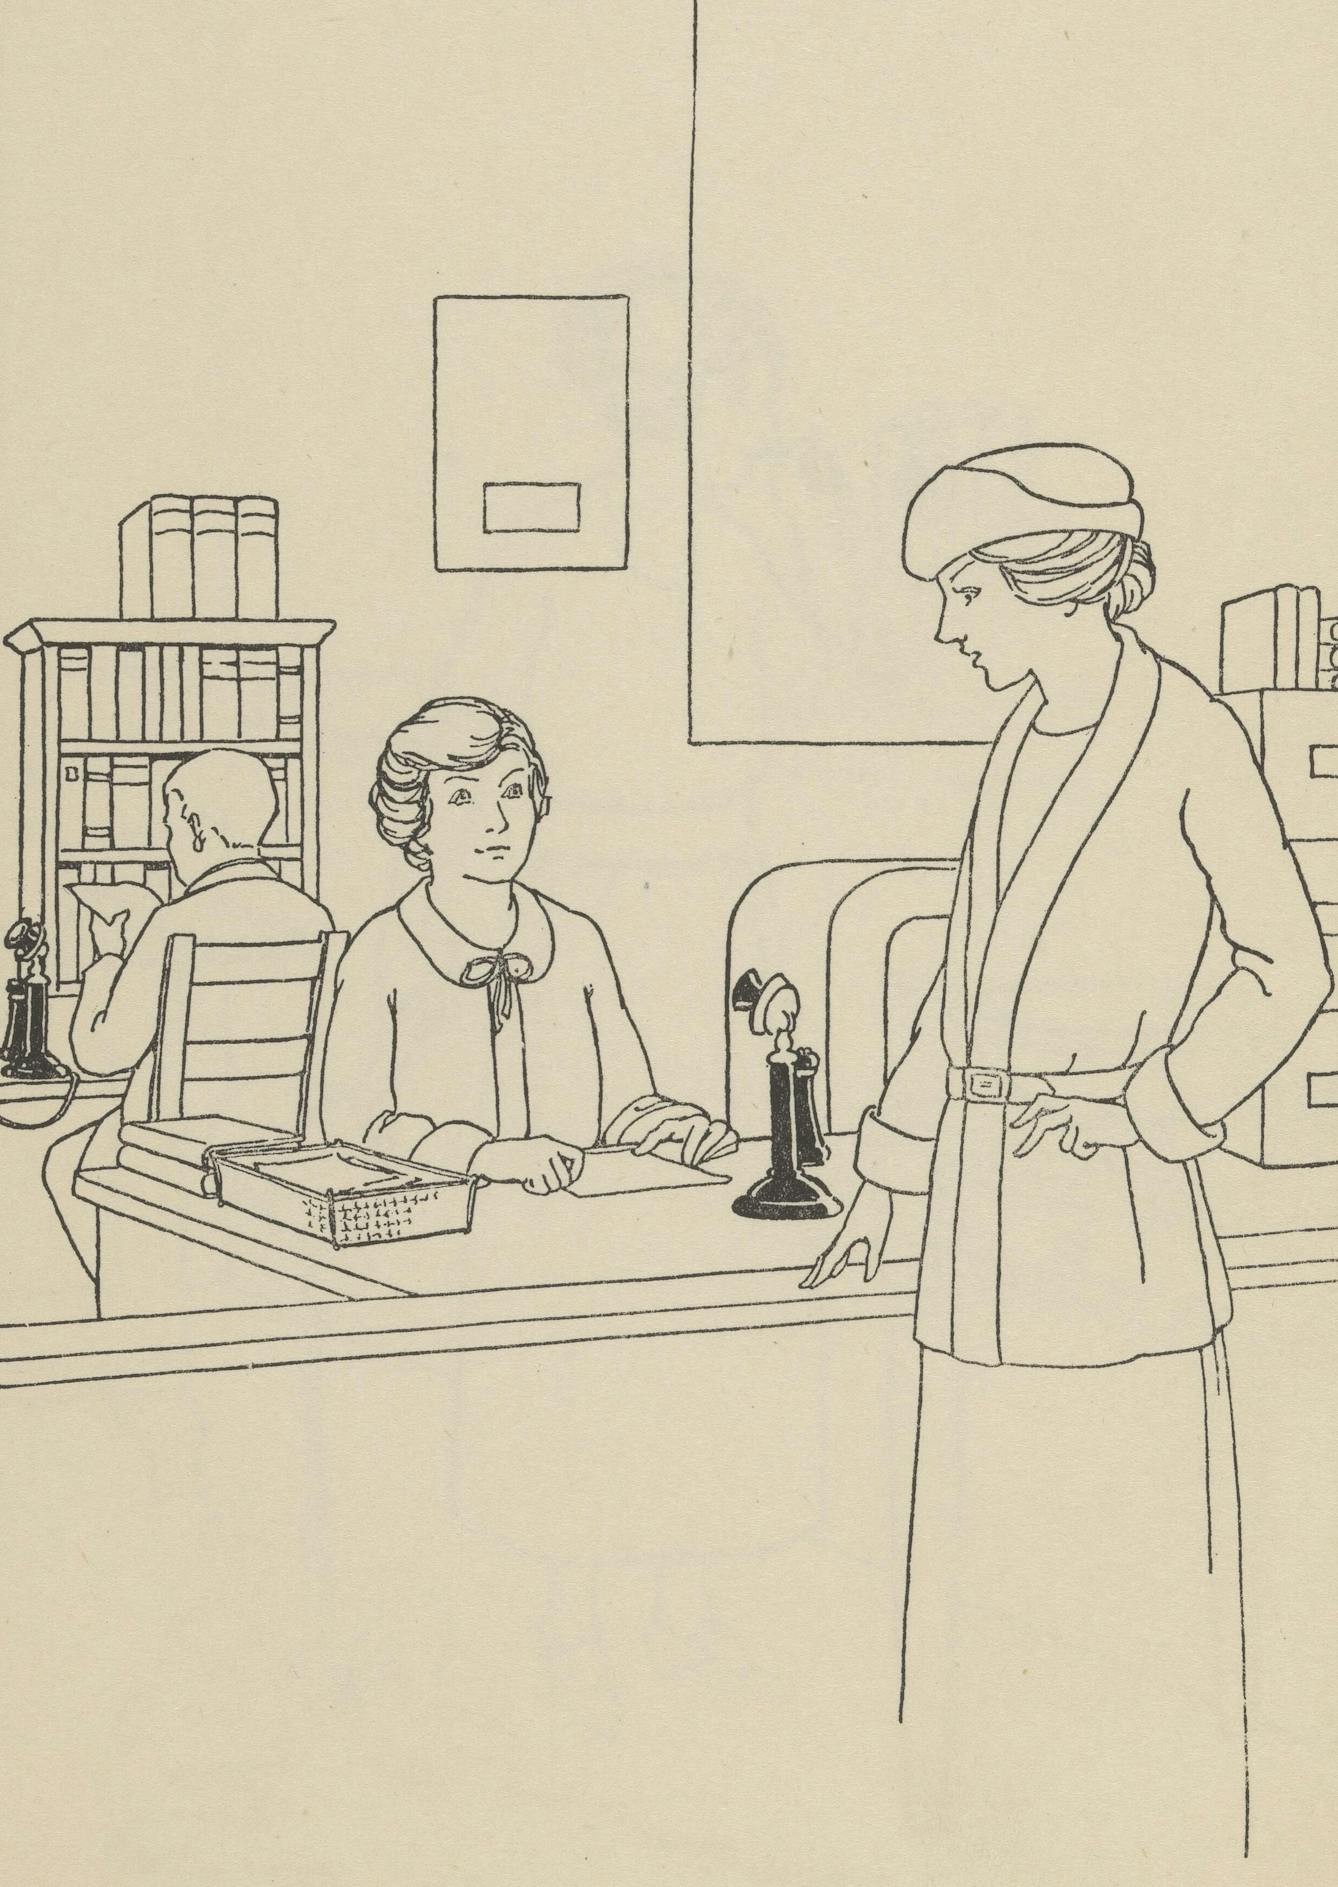 Black and white line drawing showing one woman standing and another sitting. The woman sitting is behind a desk.